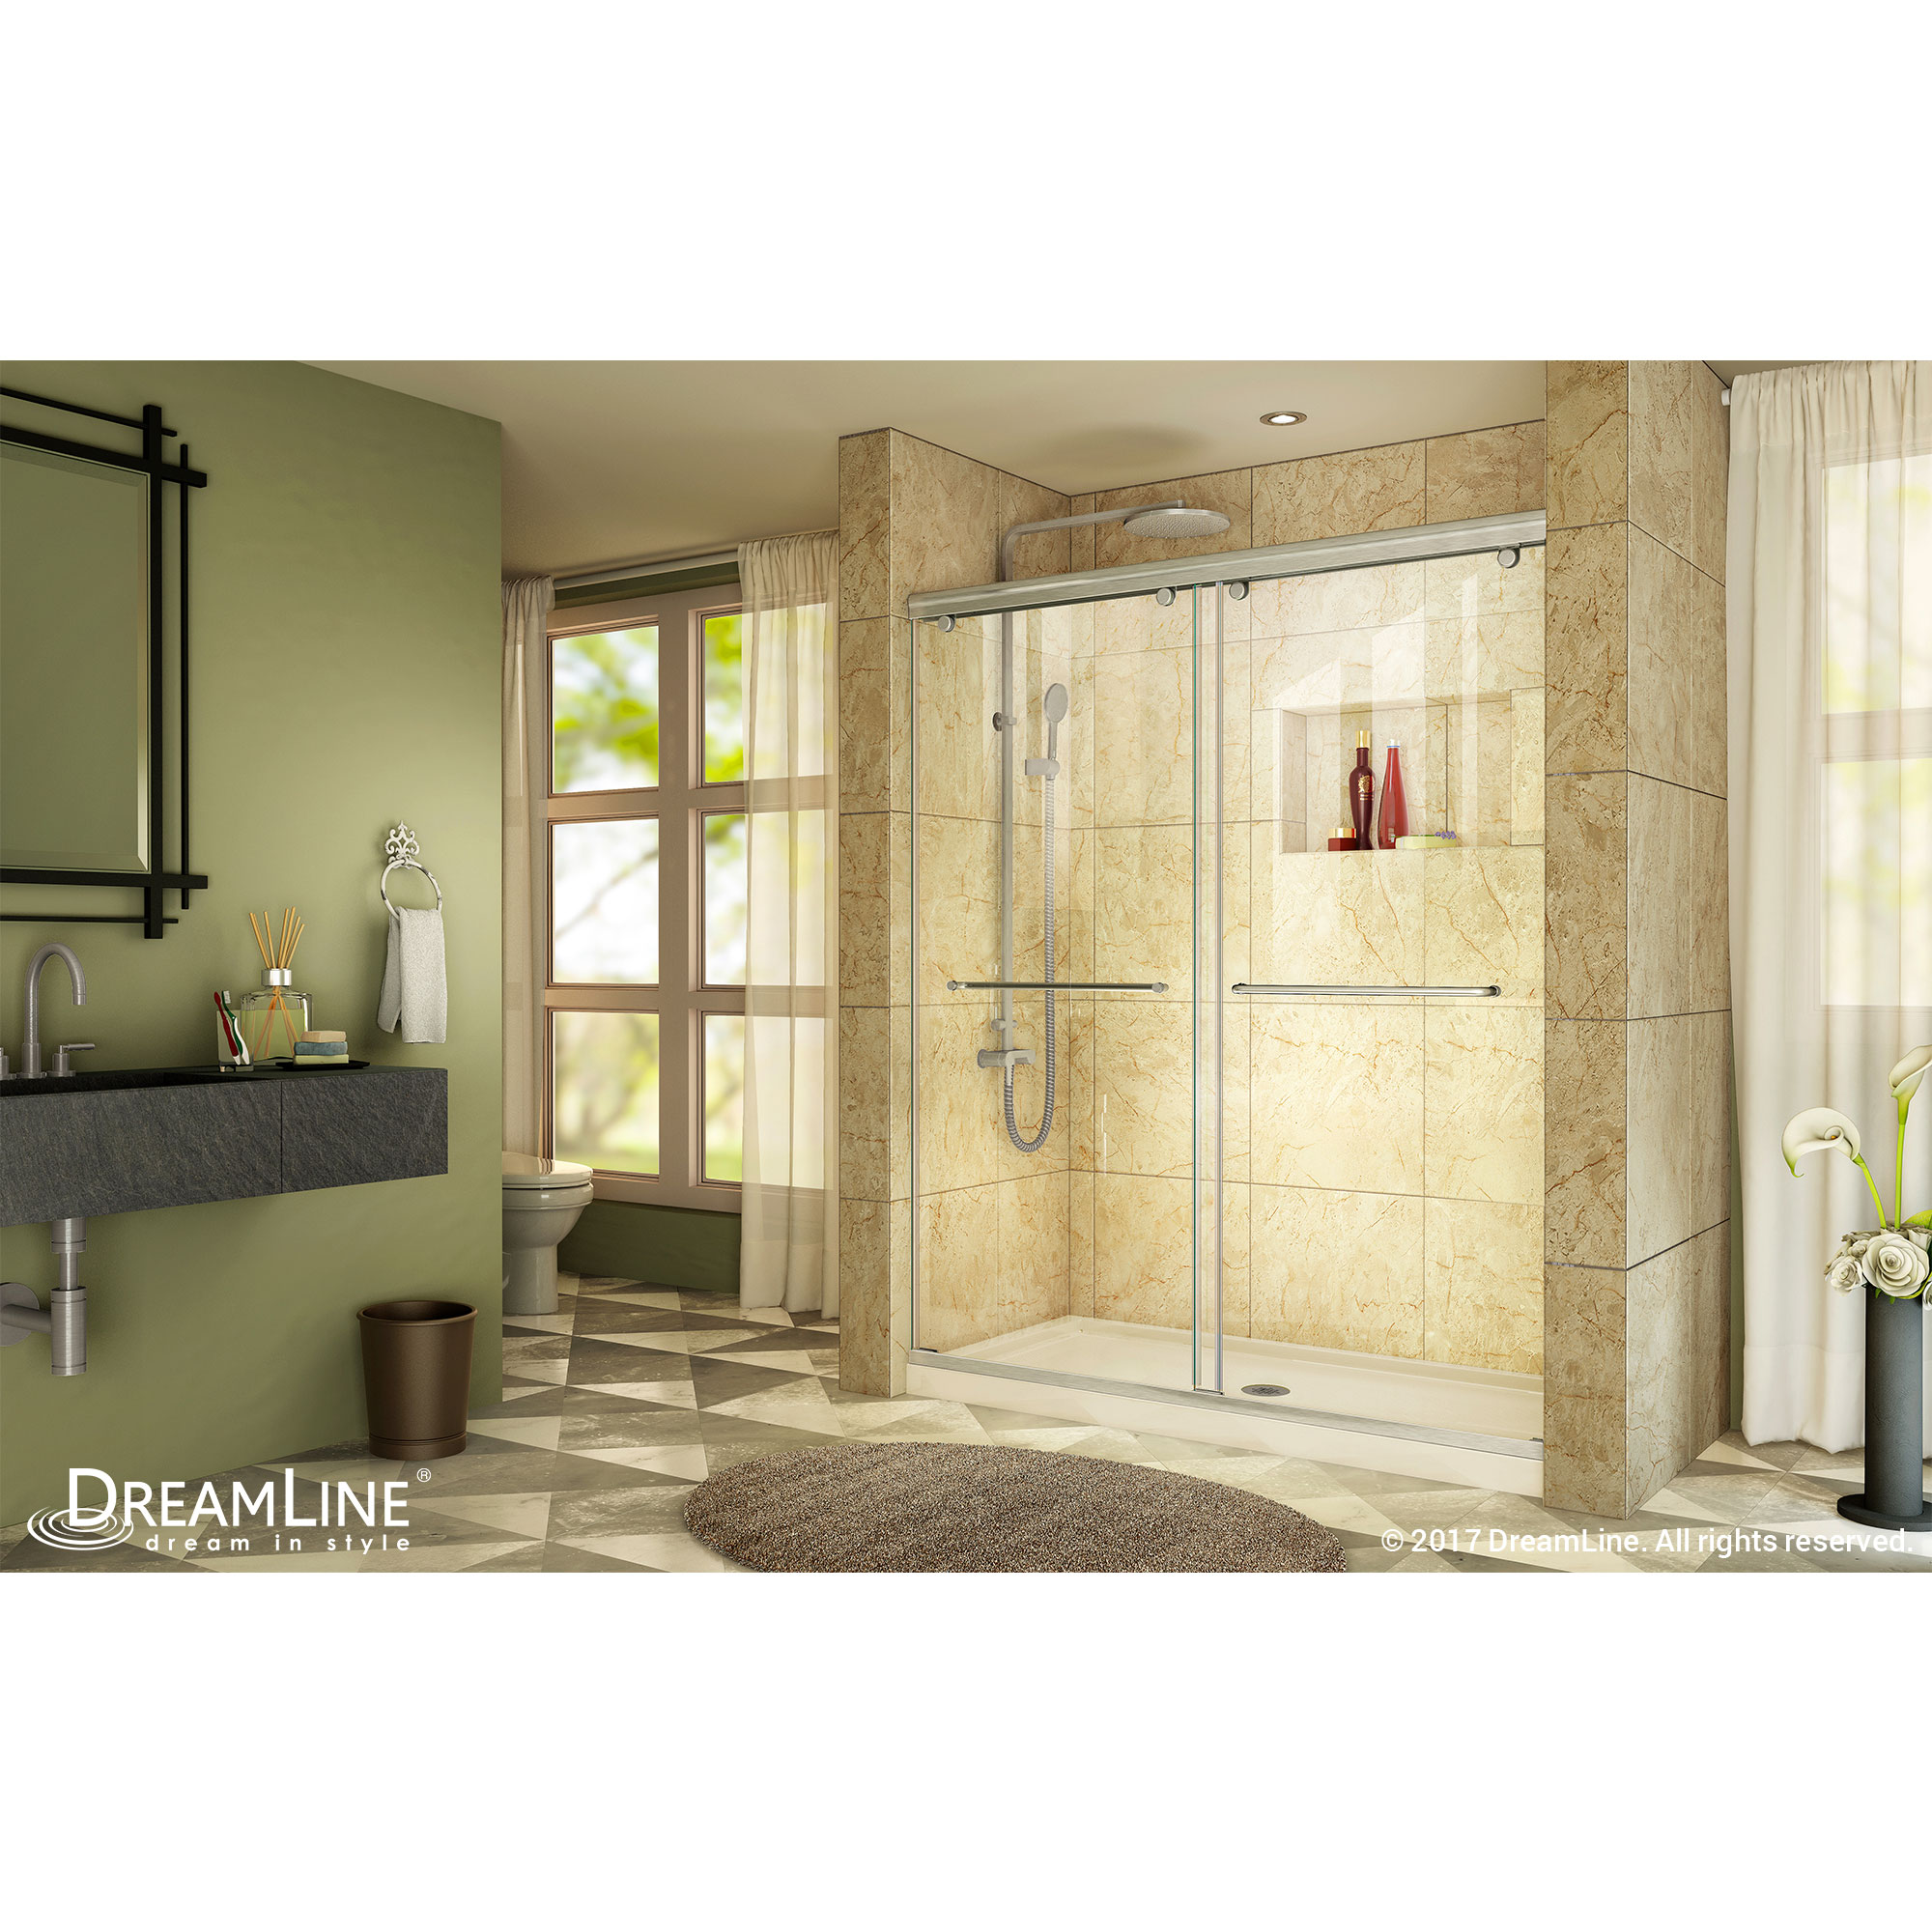 DreamLine Charisma 34 in. D x 60 in. W x 78 3/4 in. H Bypass Shower Door in Brushed Nickel with Center Drain Biscuit Base Kit